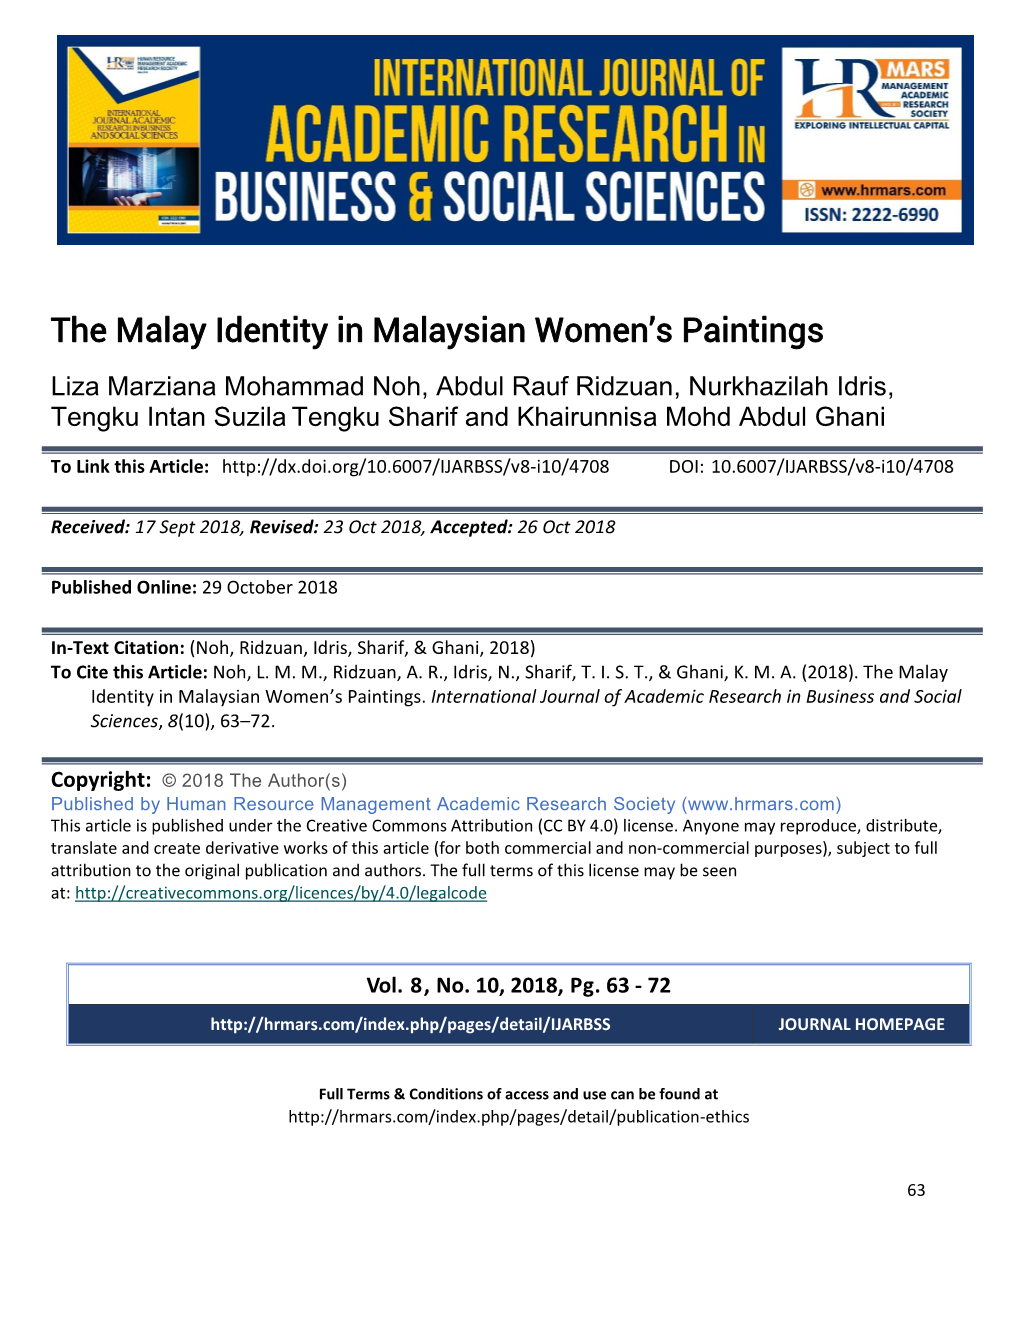 The Malay Identity in Malaysian Women's Paintings